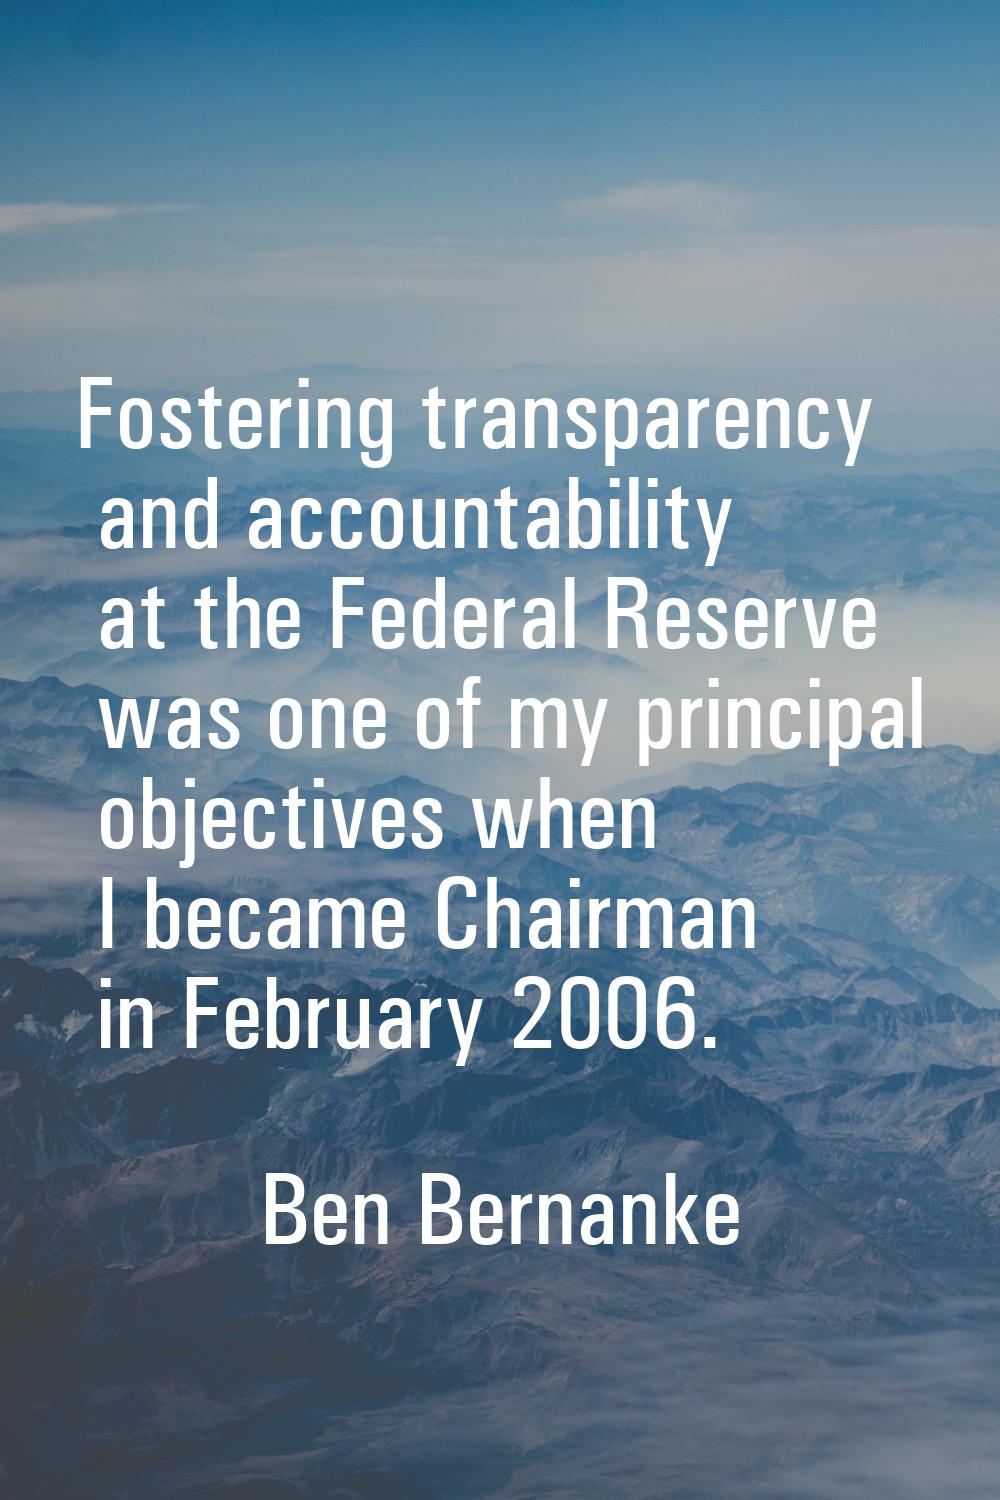 Fostering transparency and accountability at the Federal Reserve was one of my principal objectives